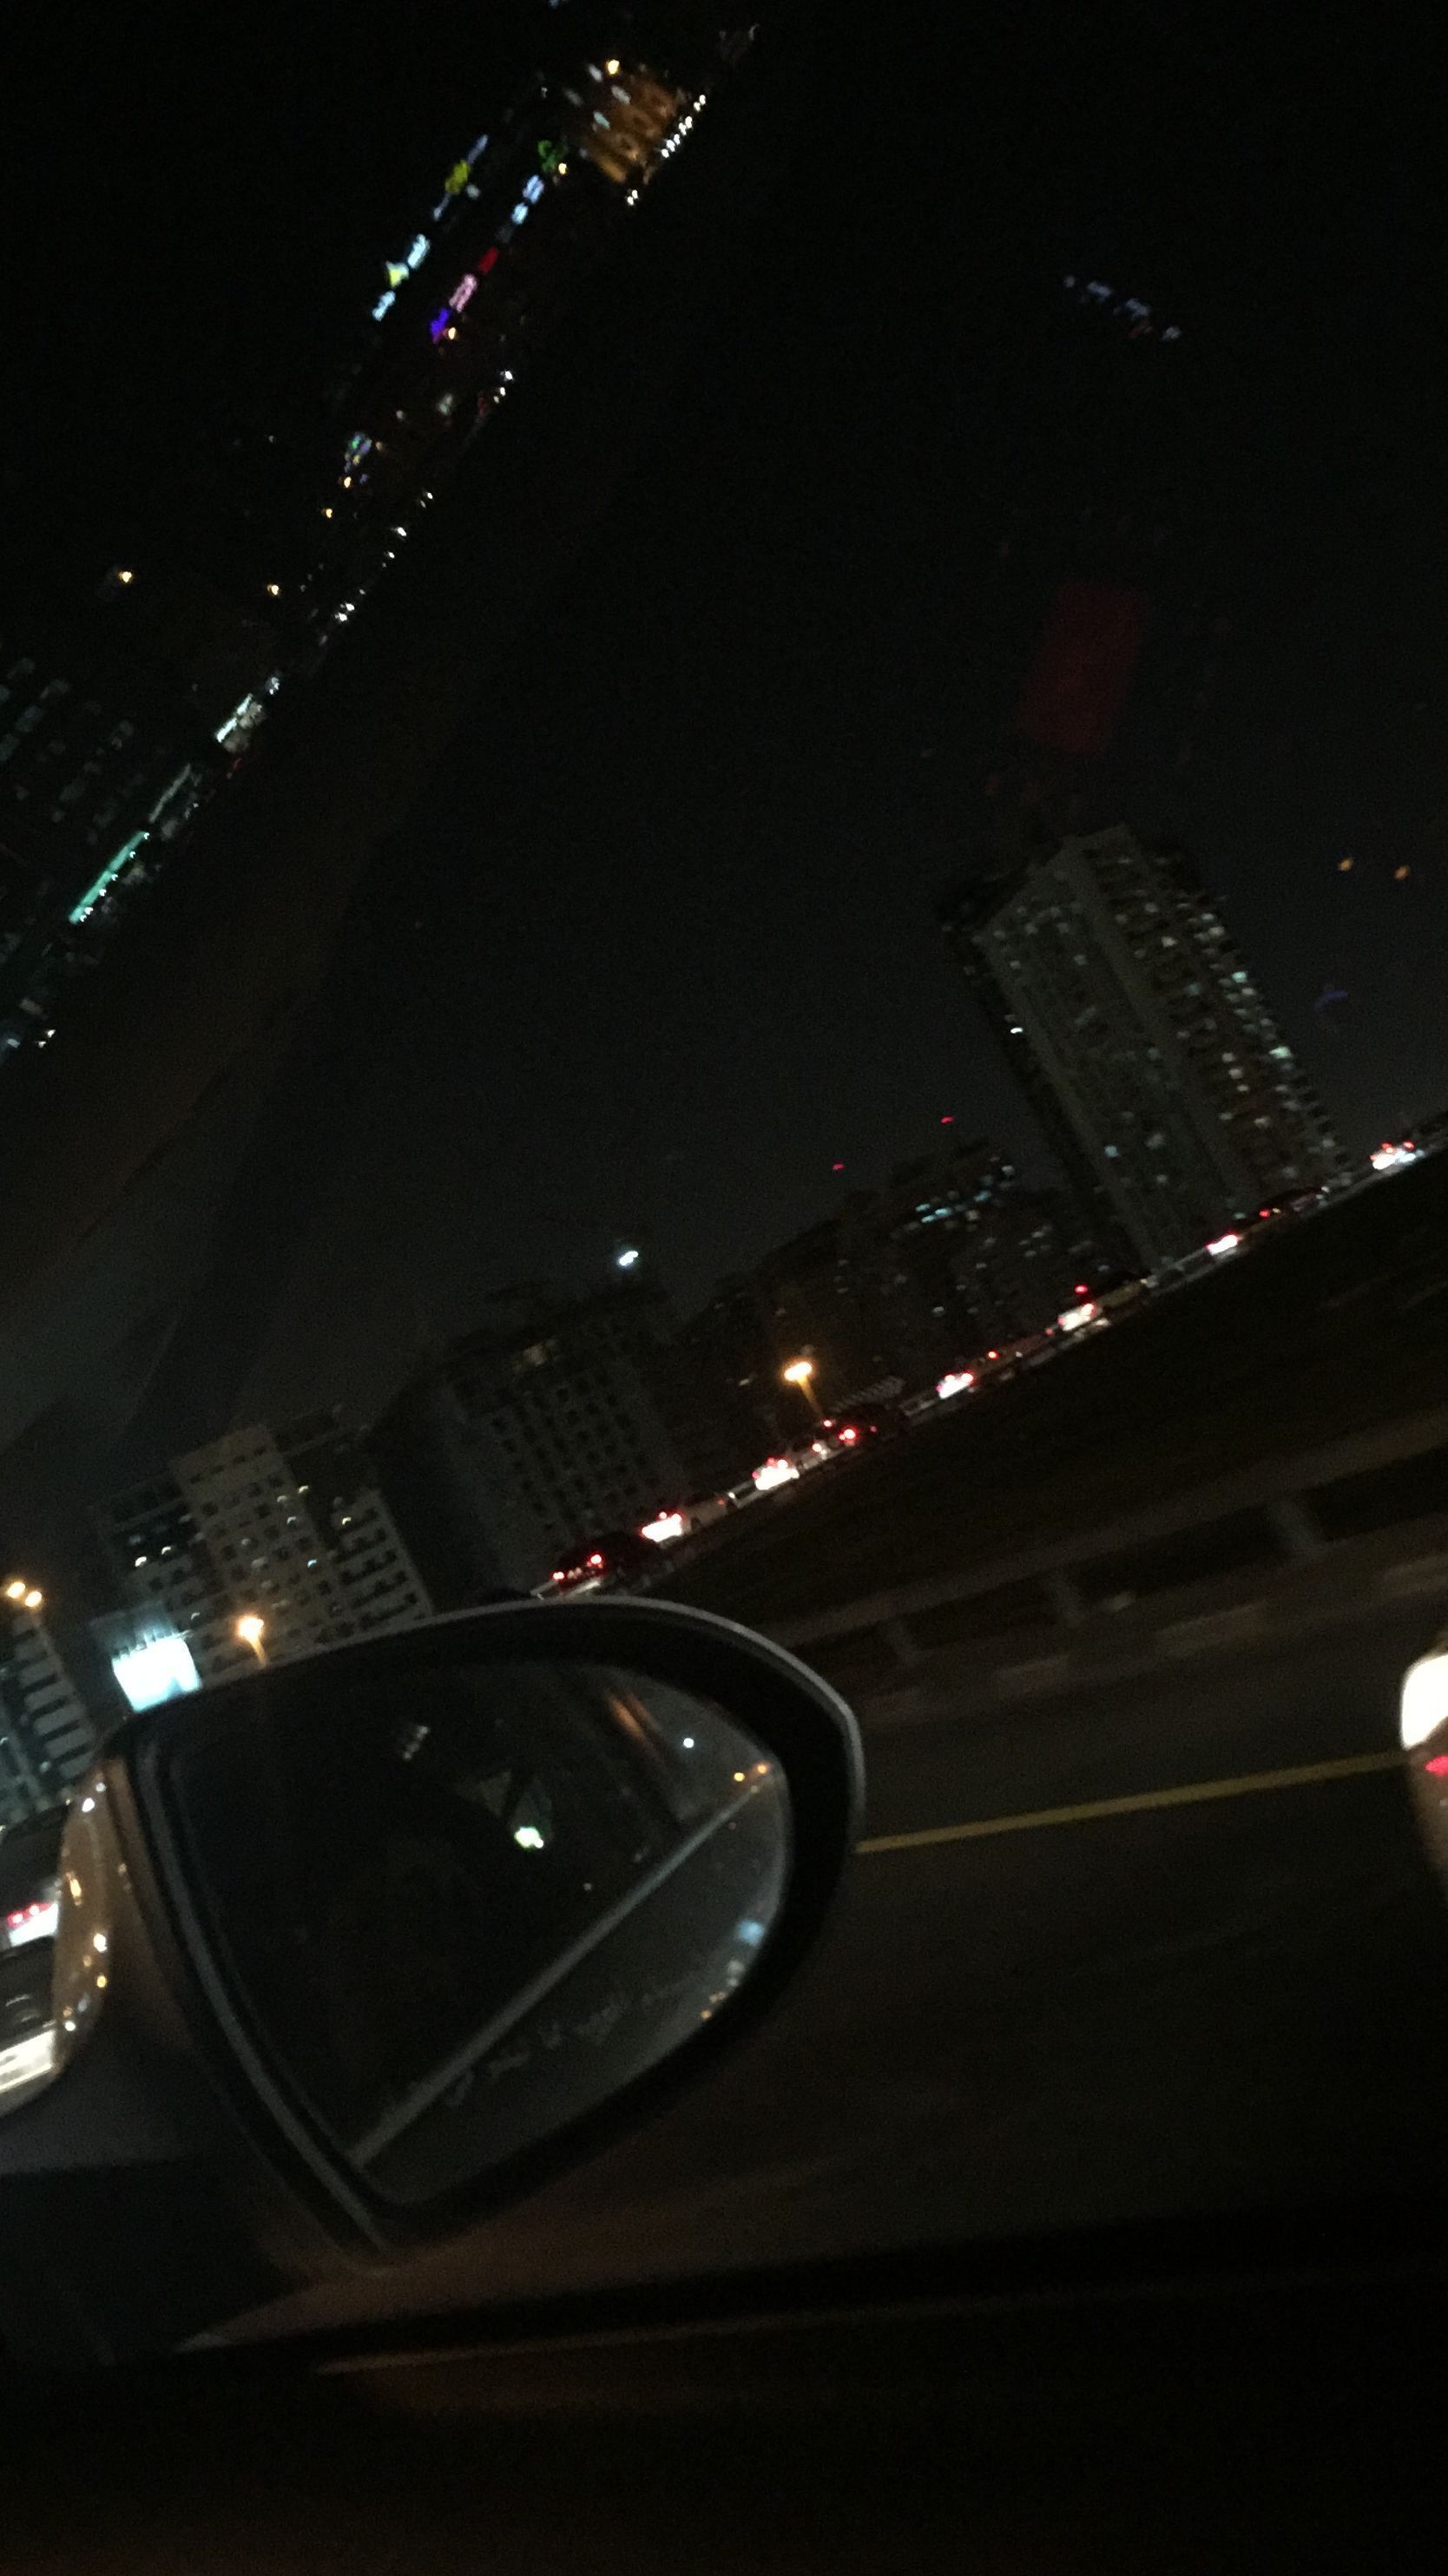 Tumblr photography. Night aesthetic, Driving photography, Tumblr photography